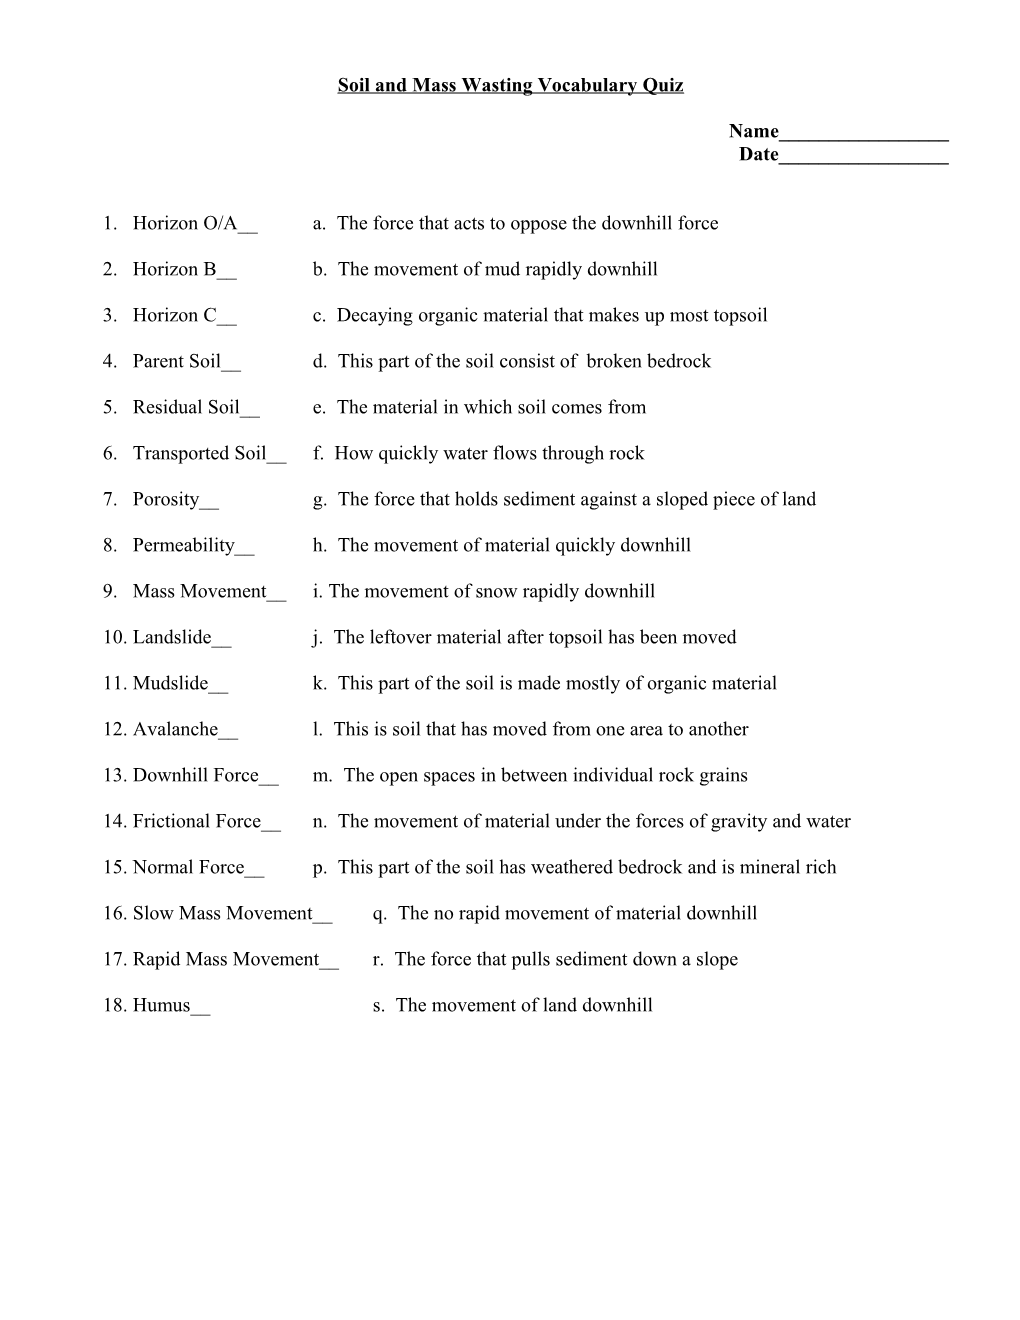 Soil and Mass Wasting Vocabulary Quiz